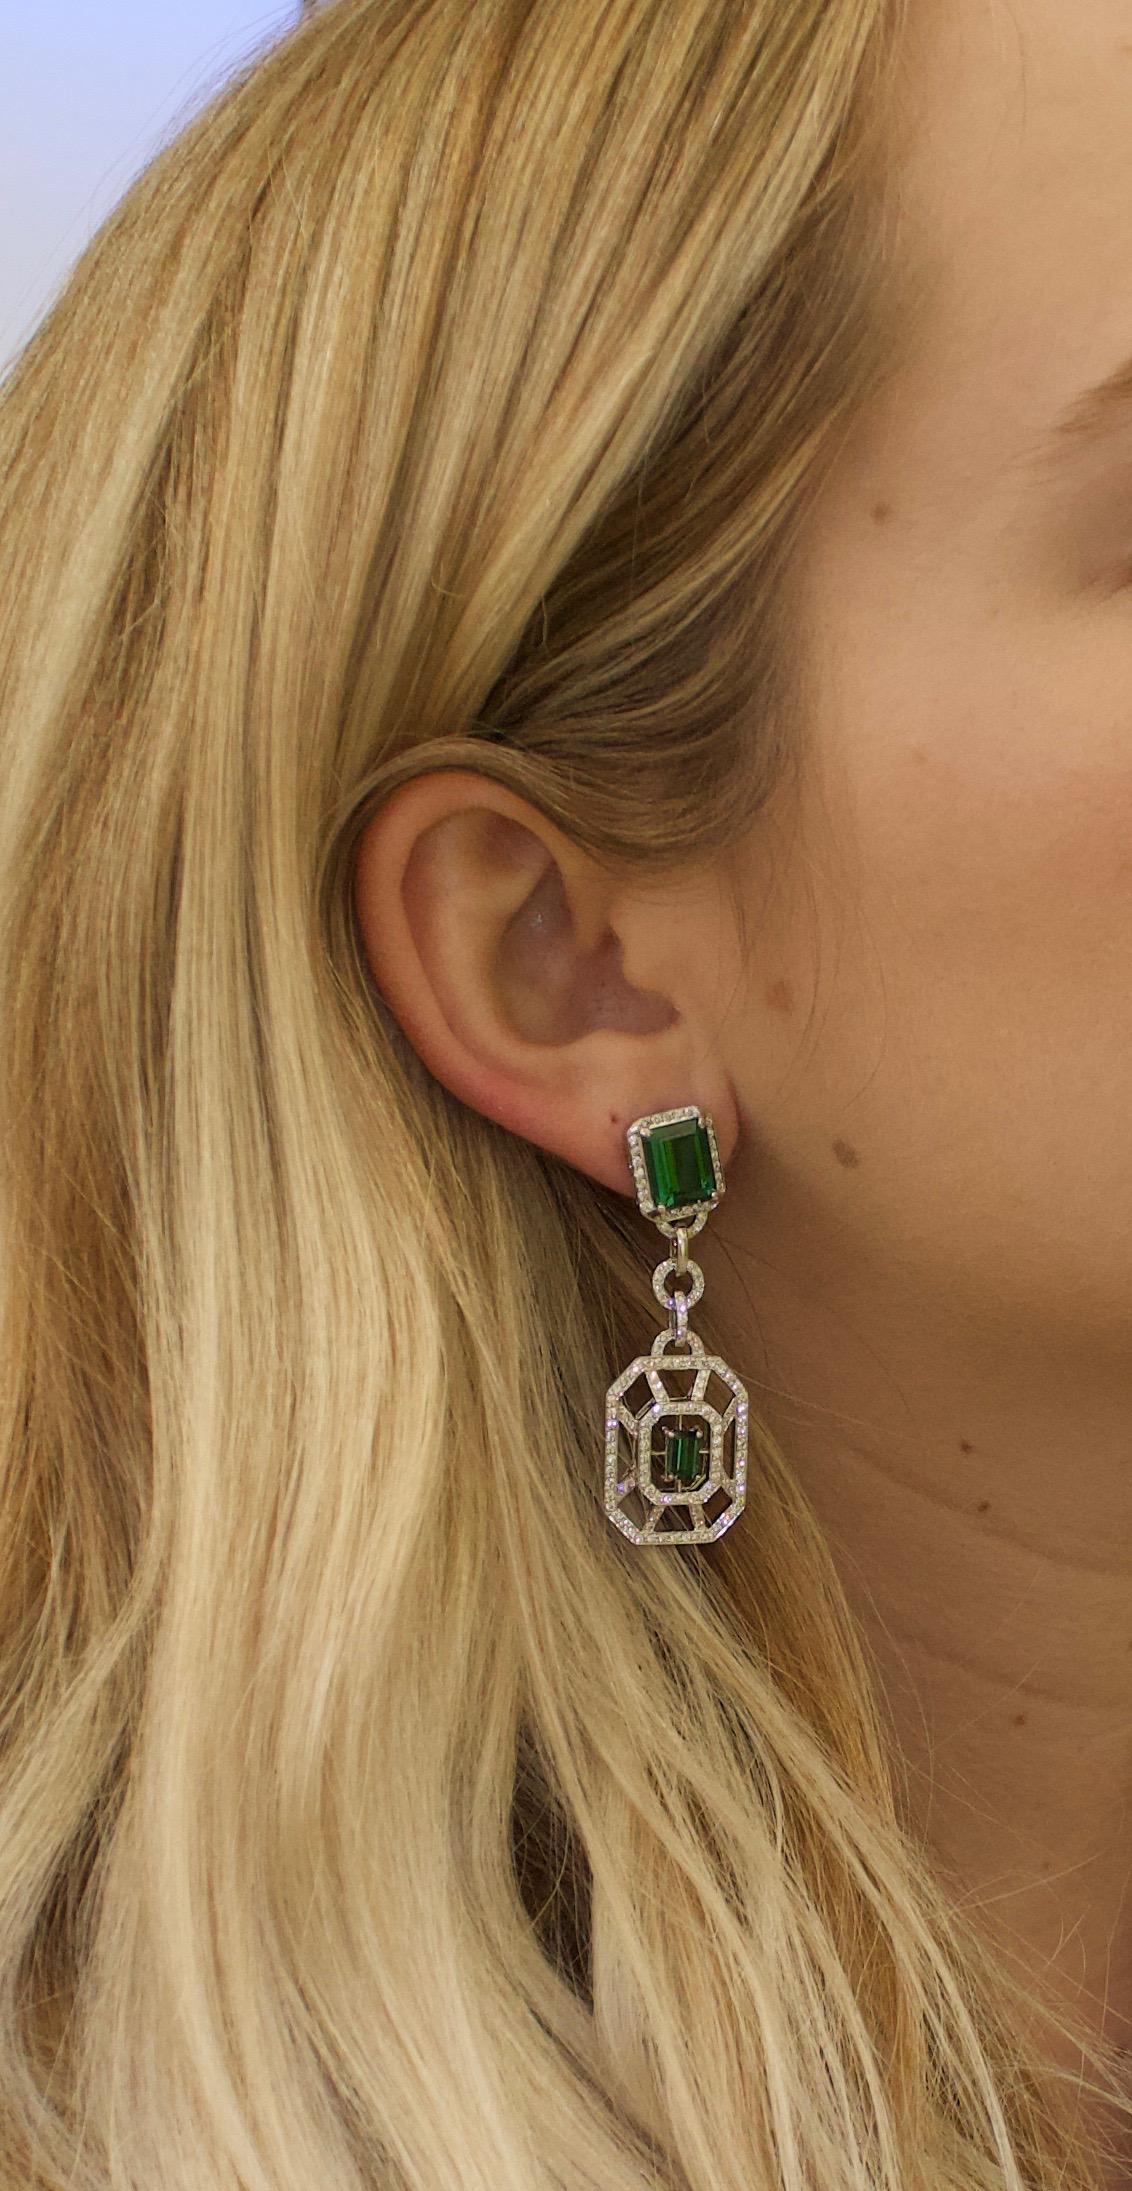 Green Tourmaline and Diamond Dangling Earrings in 18k White Gold
Two Emerald Cut  Cut Green Tourmalines Weighing 7.20 Carats Approximately 
Two Emerald Cut  Cut Green Tourmalines Weighing 1.20 Carats Approximately 
292 Round Brilliant Cut Diamonds